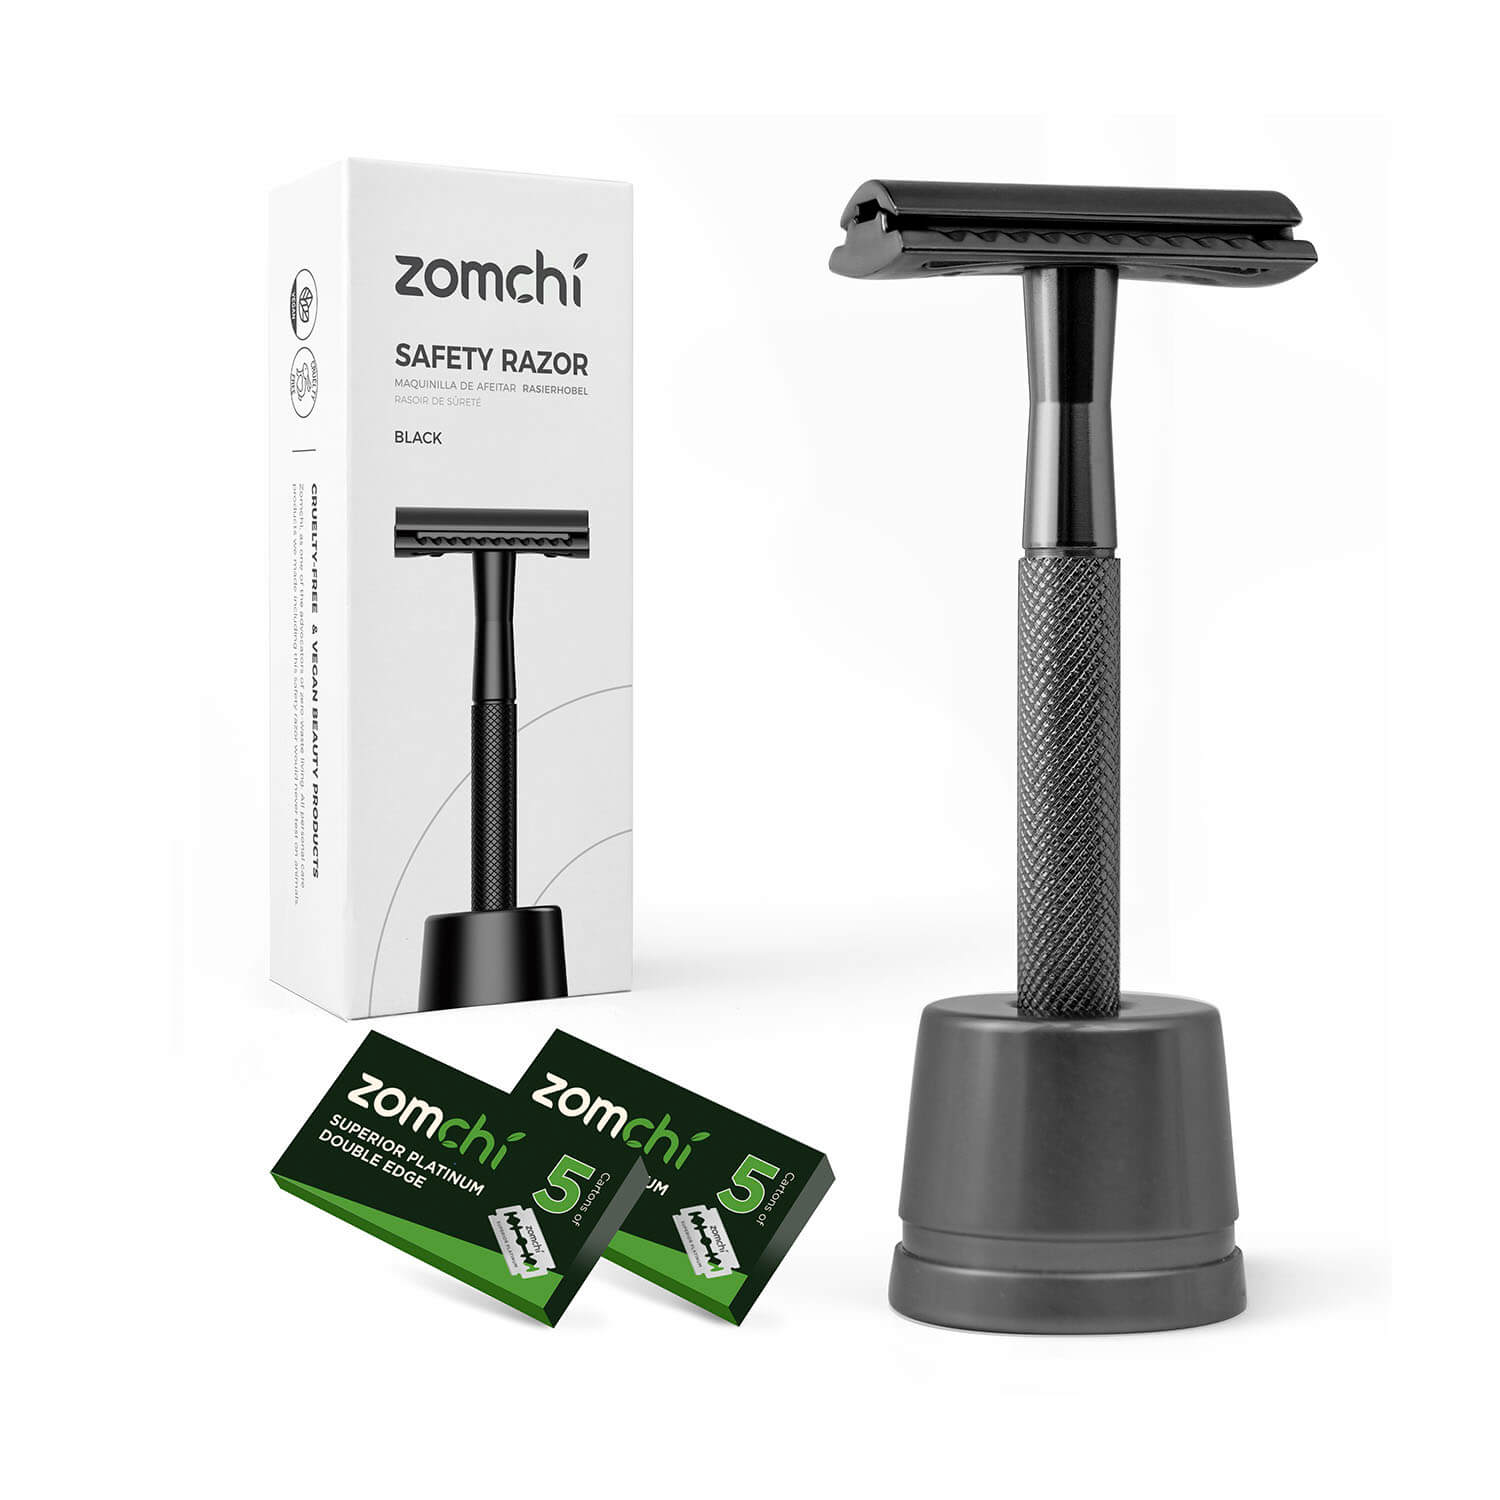 Zomchi Black Safety Razor With Stand And 10 Counts Razor Blades